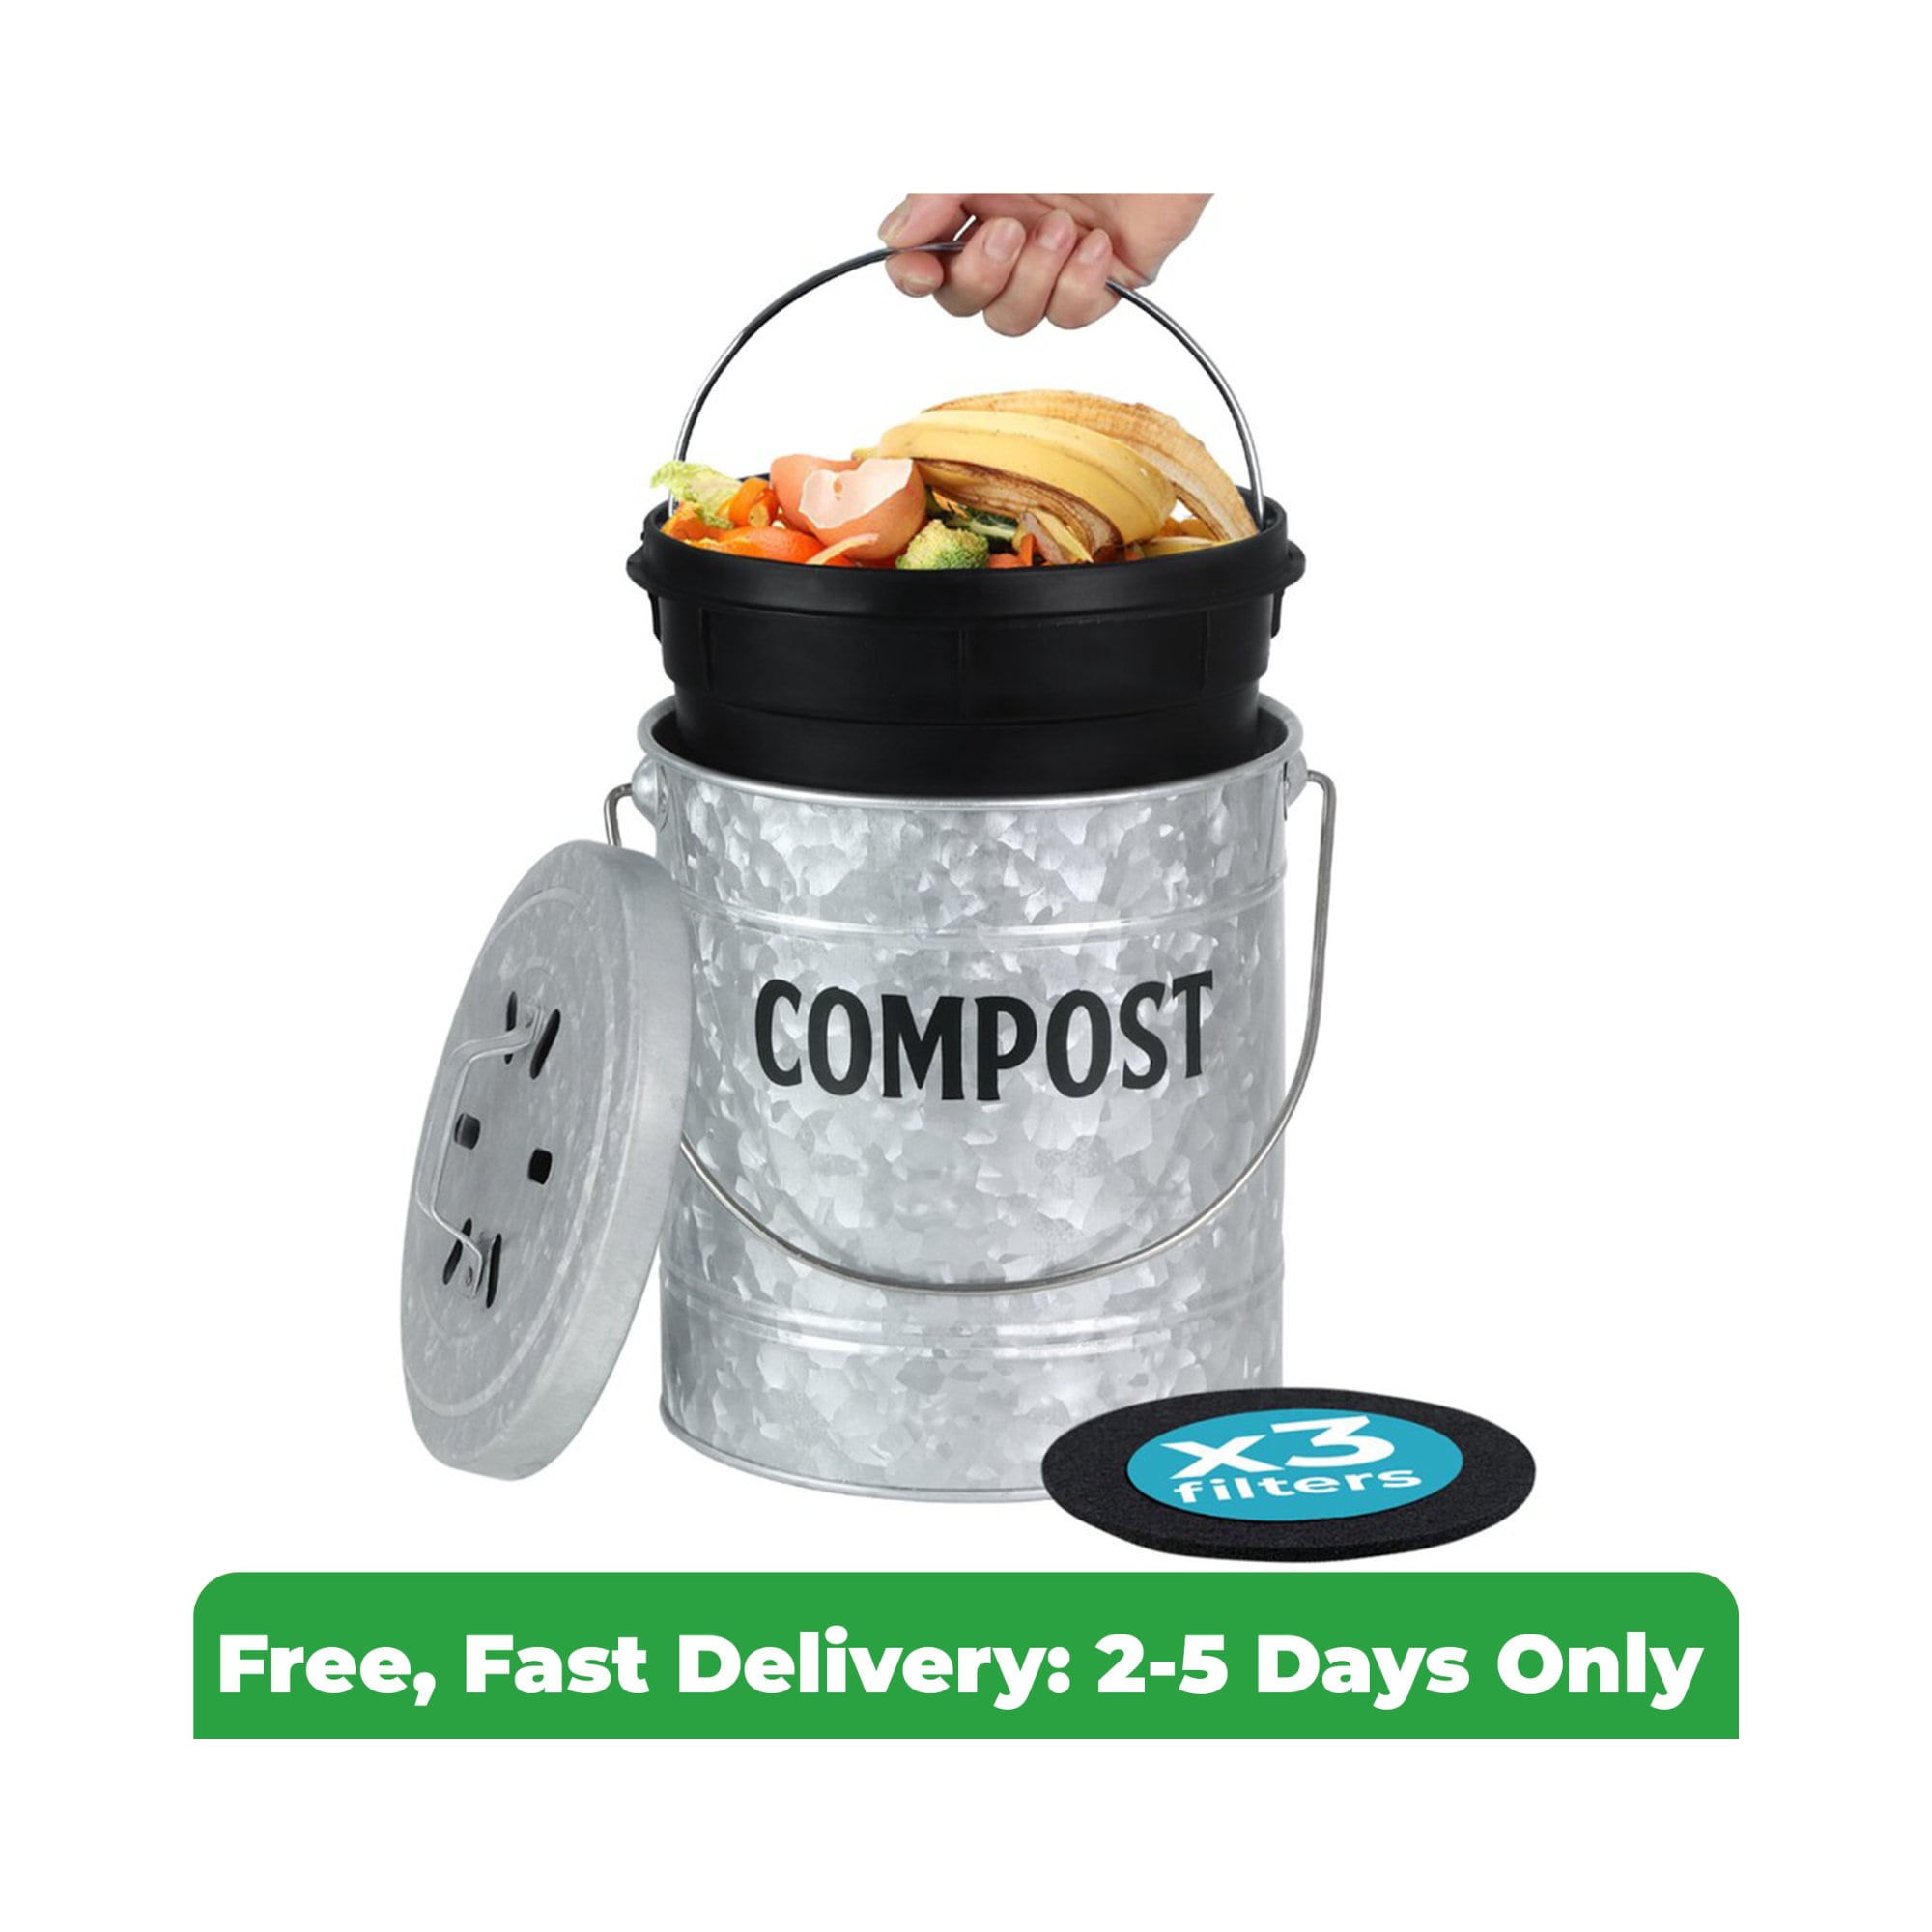 Cooler Kitchen 1.3 Gal. Compost Bin with Charcoal Filters - White 